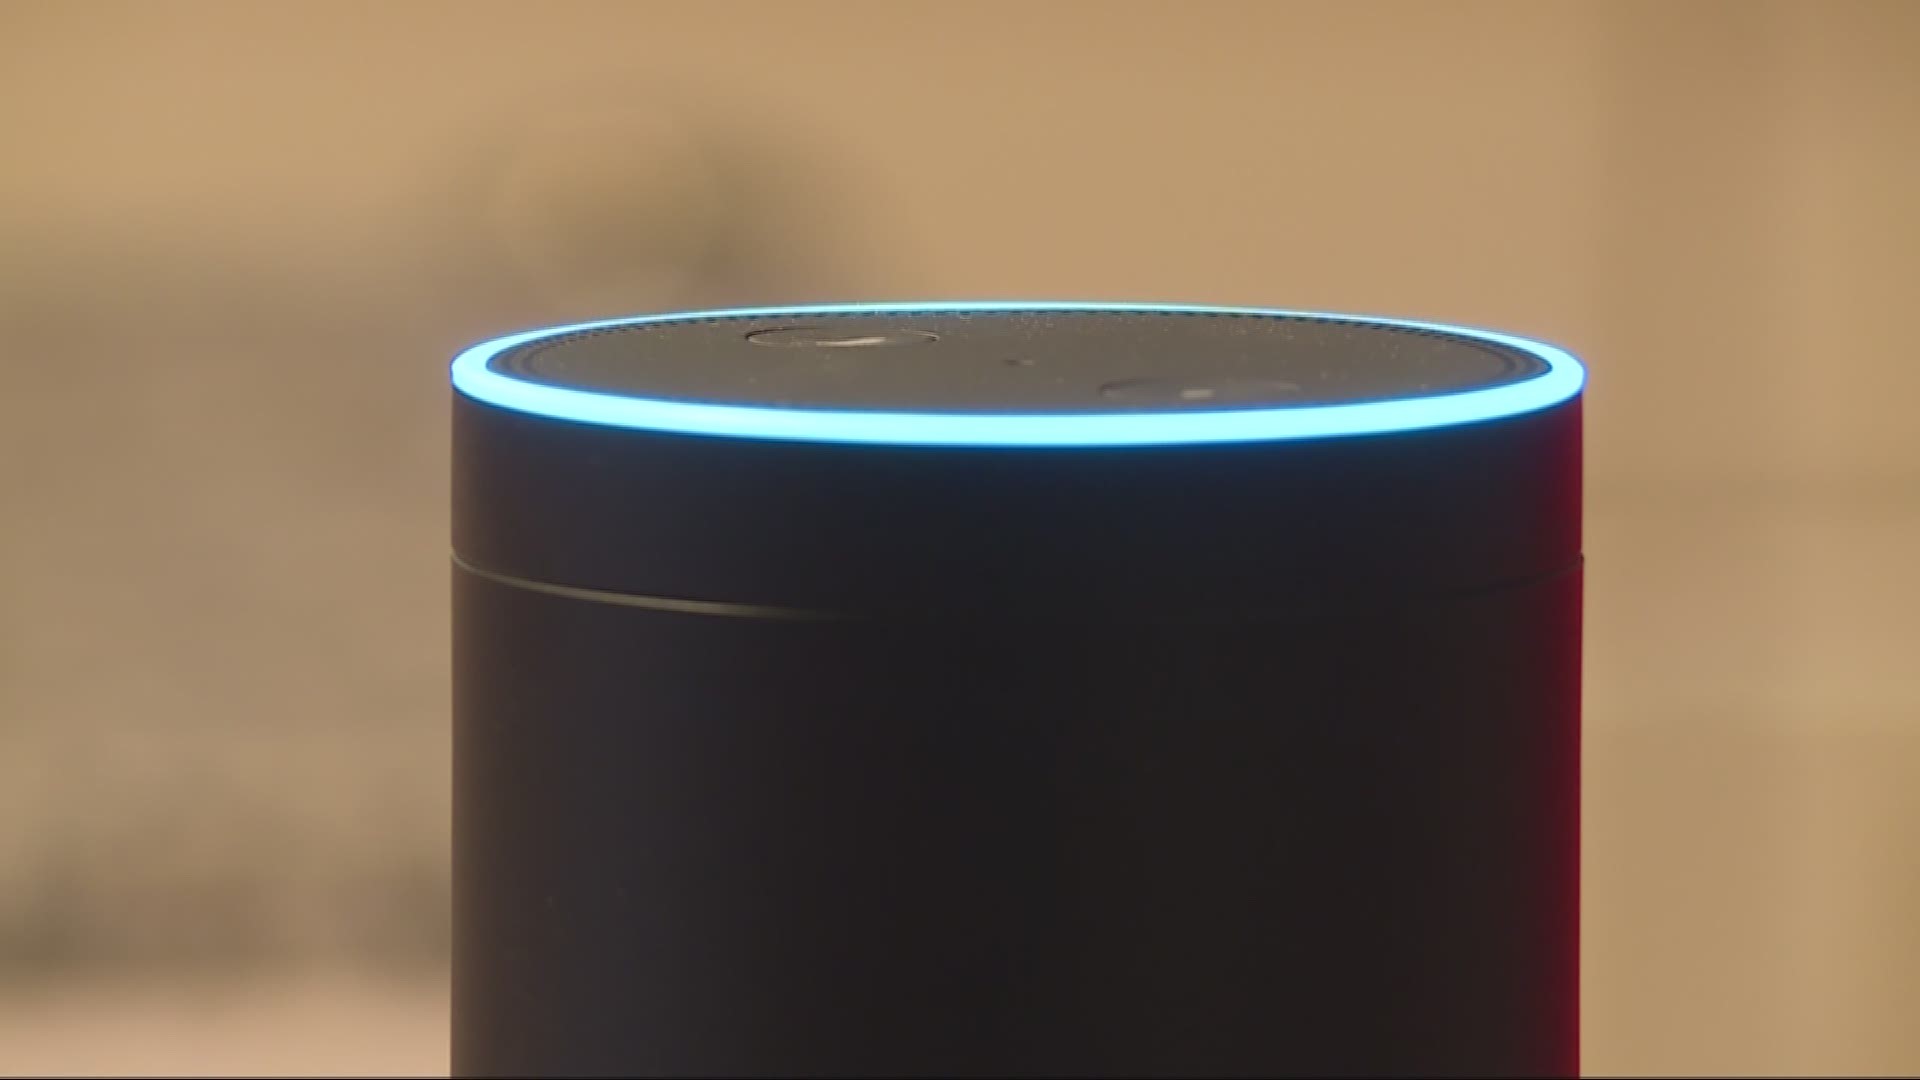 Alexa voice service makes life easier than some. But despite being heroes in some cases, one local woman was scared by a misunderstanding.